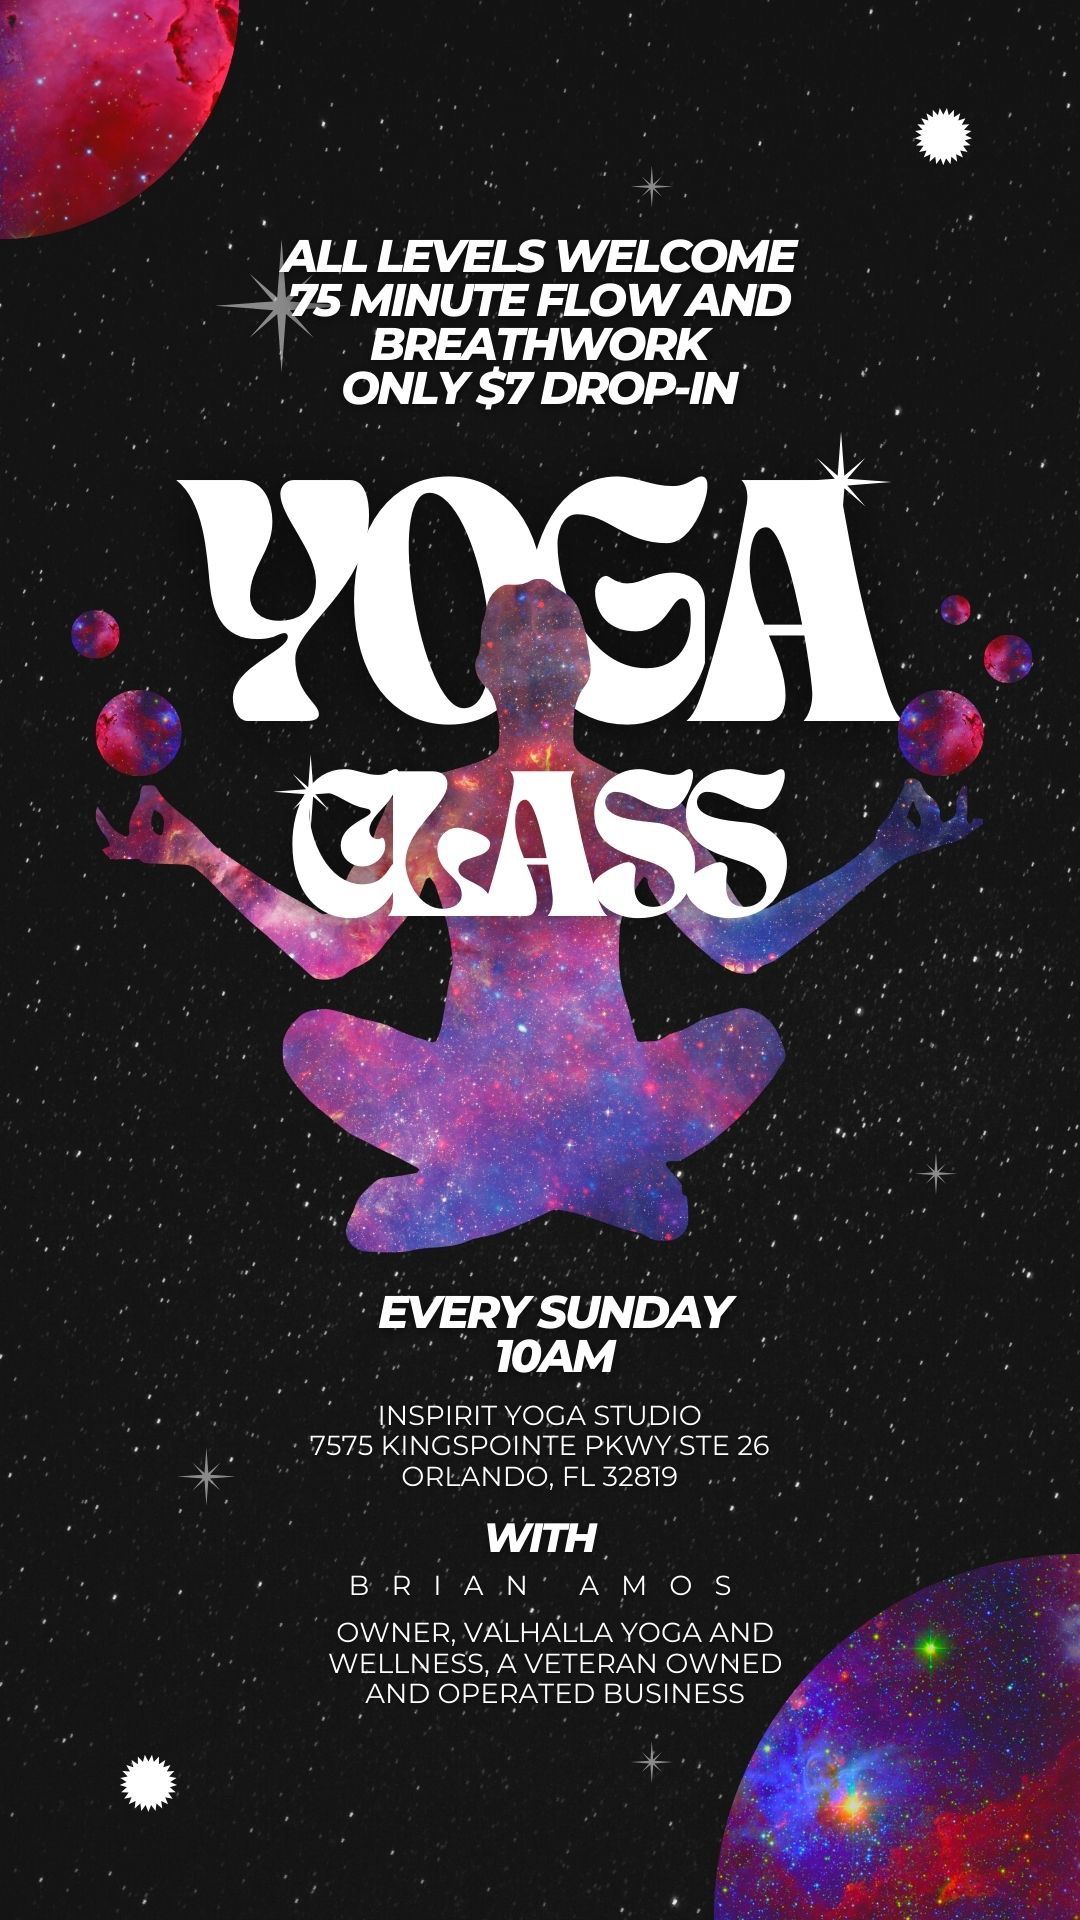 All levels Yoga and Breathwork